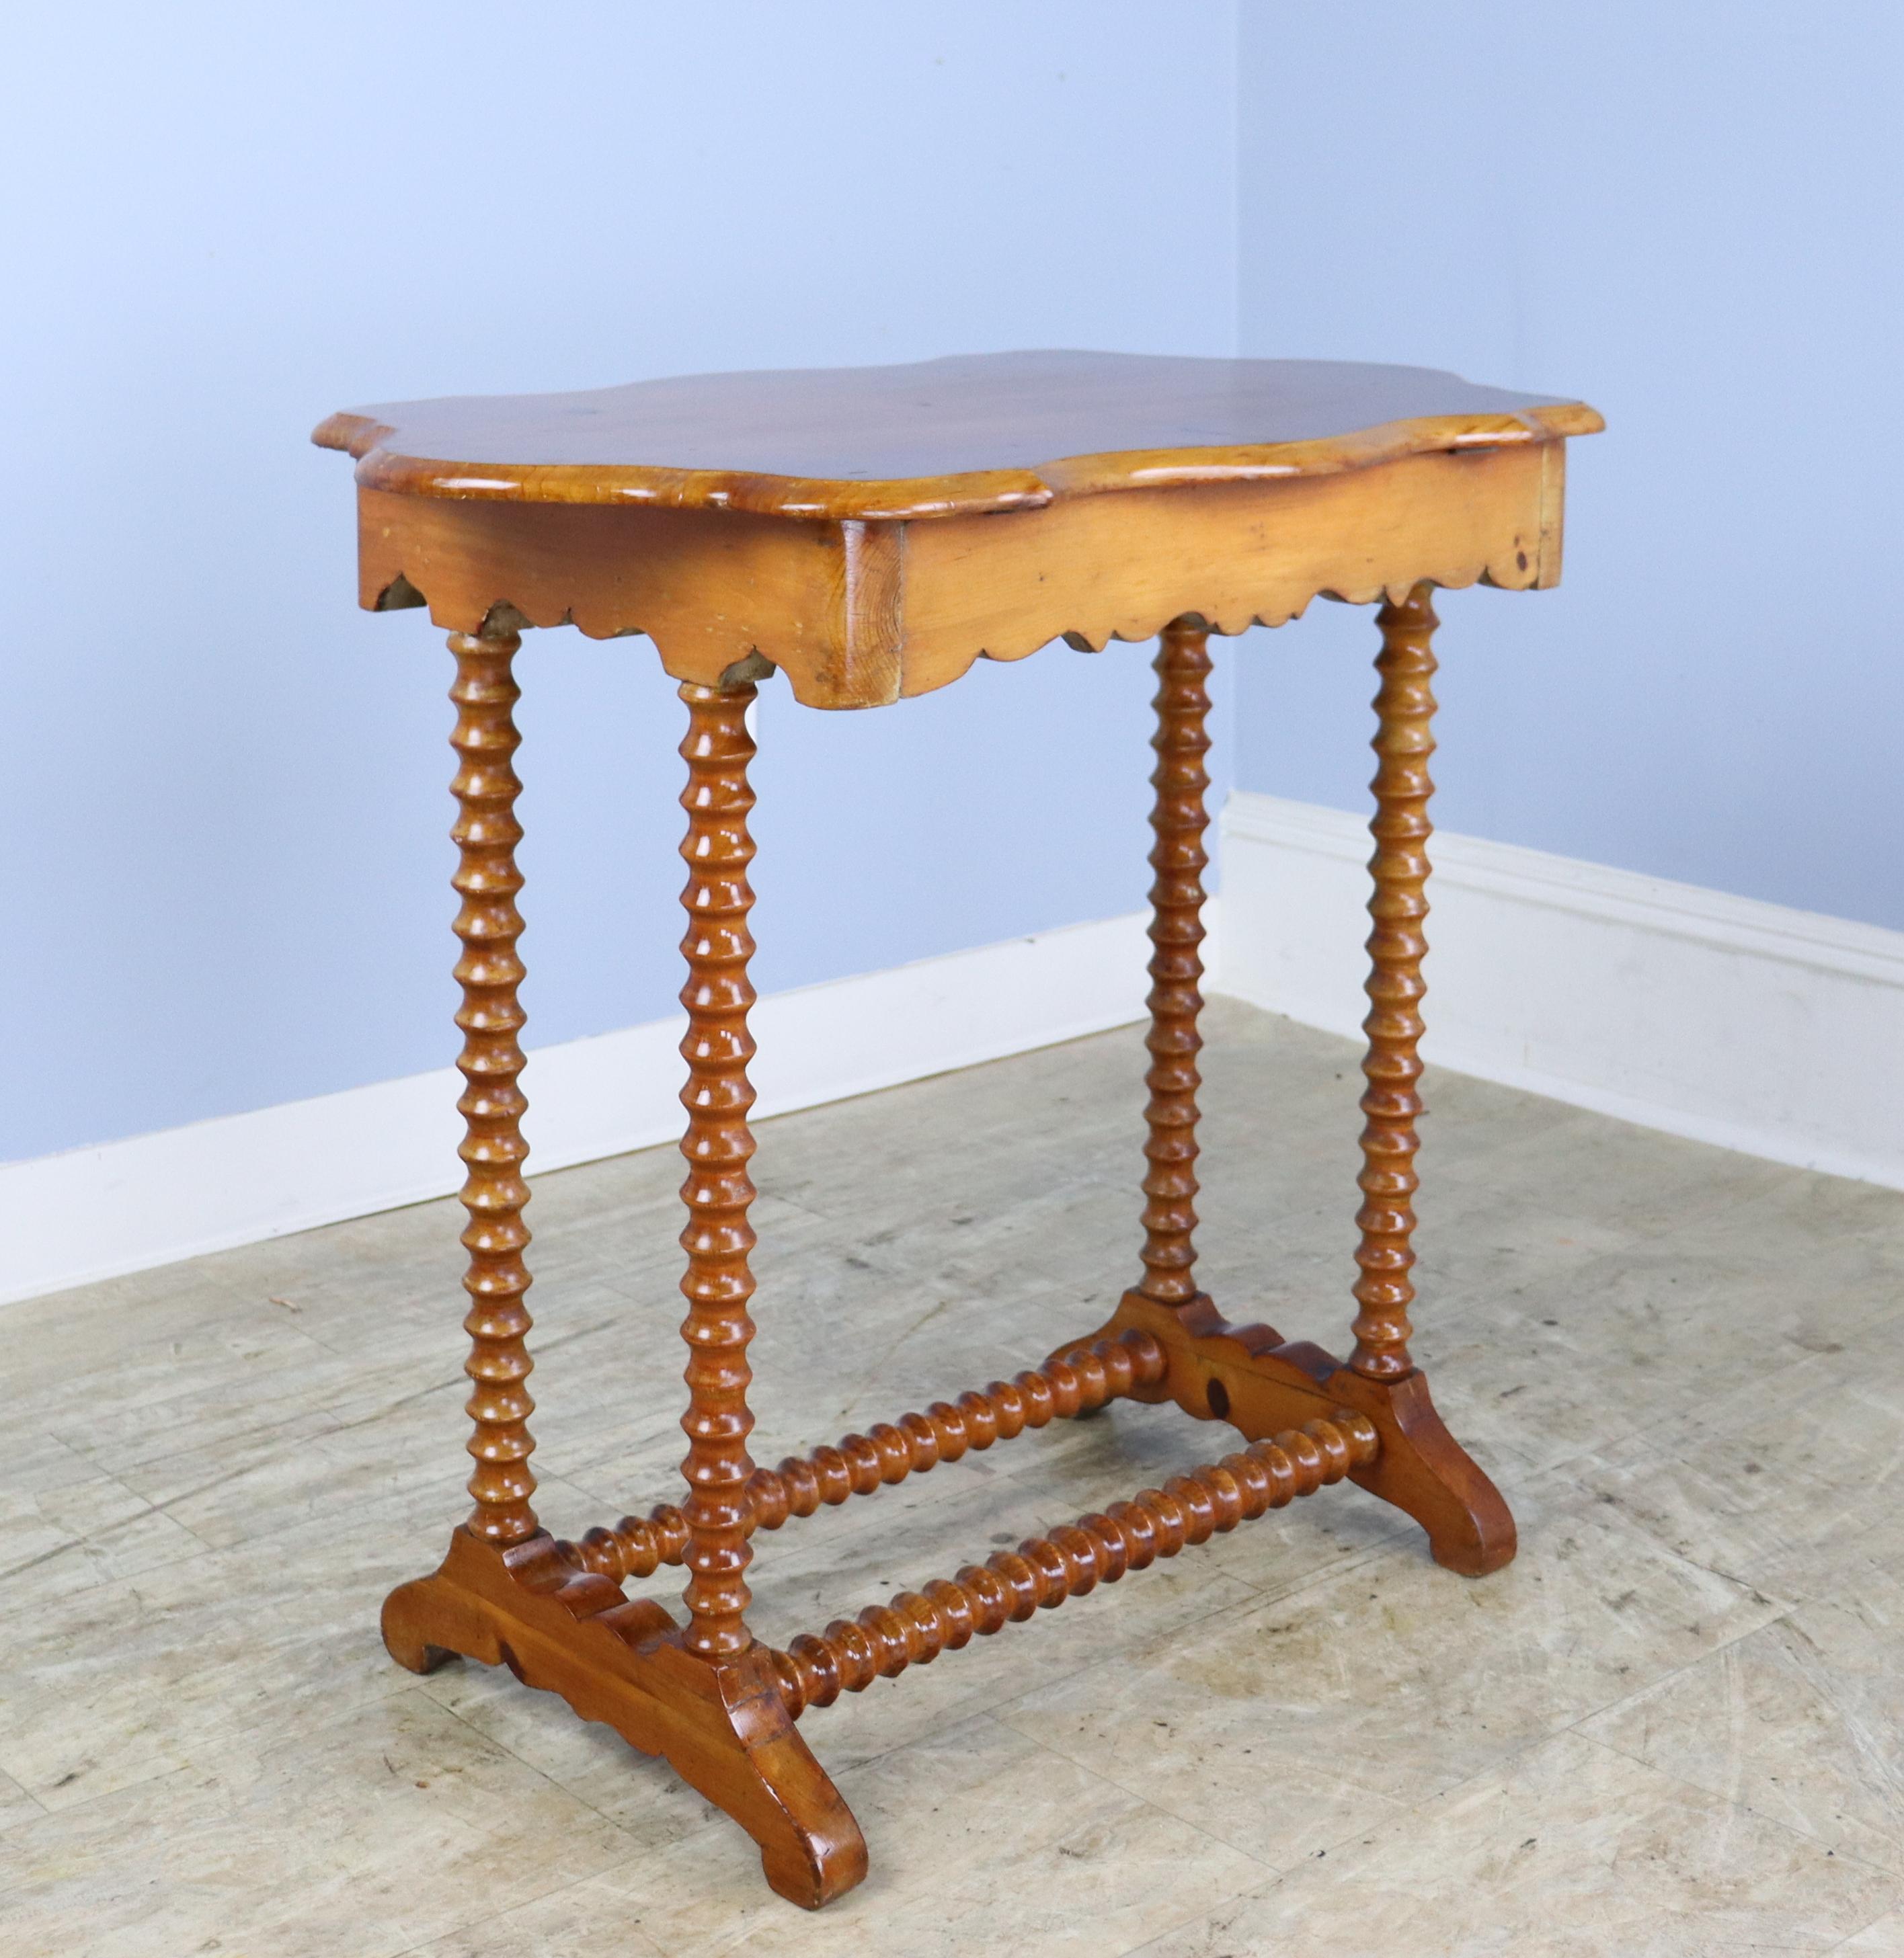 A charming bobbin legged side table with a trestle base and whisically shaped top.  The piece is in good antique condition with some light scratches.